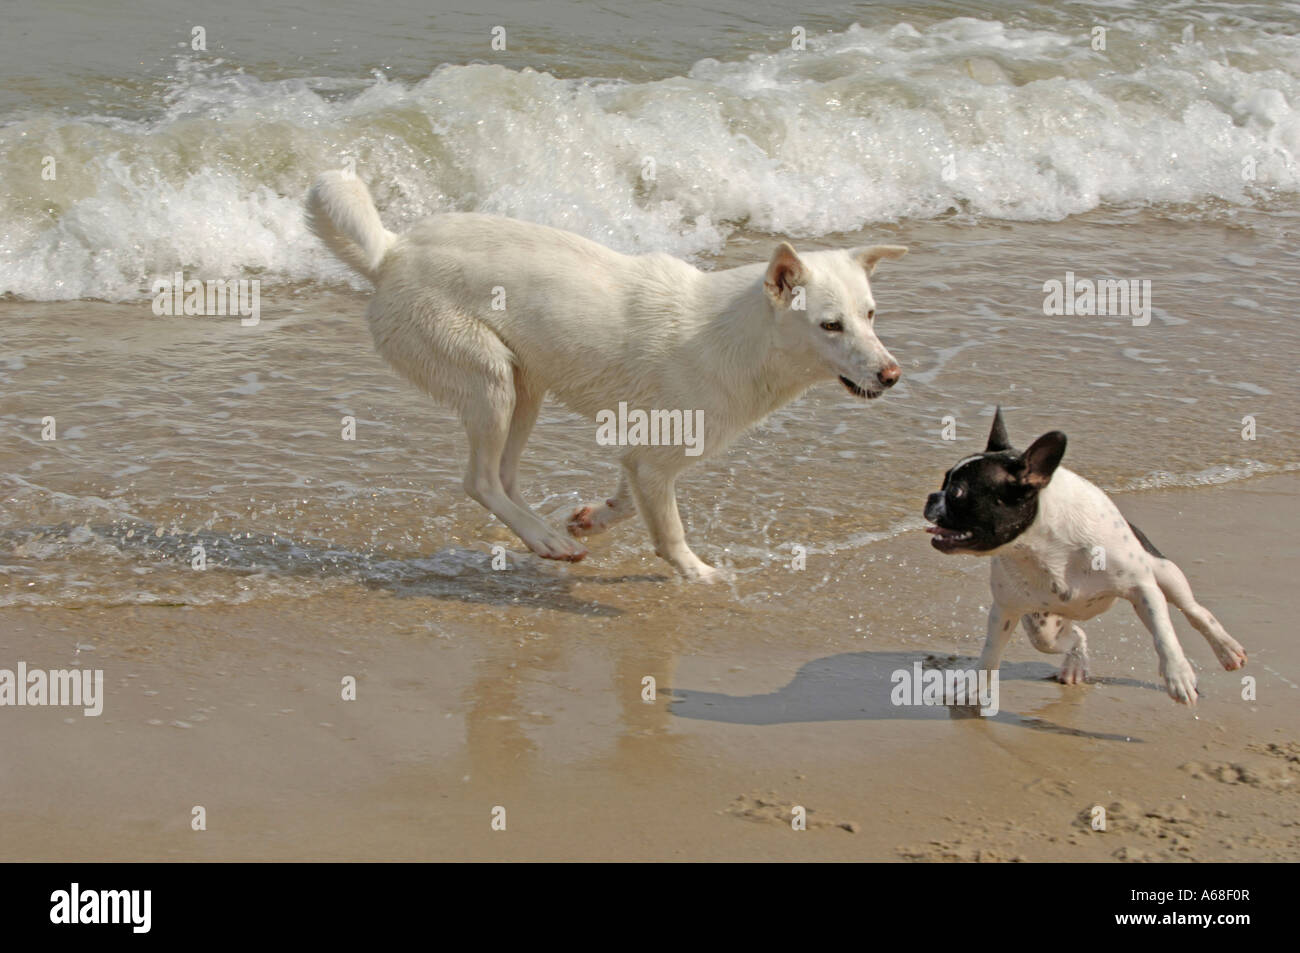 French Bulldog and White Shepherd (Canis lupus familiaris) playing on the beach Stock Photo